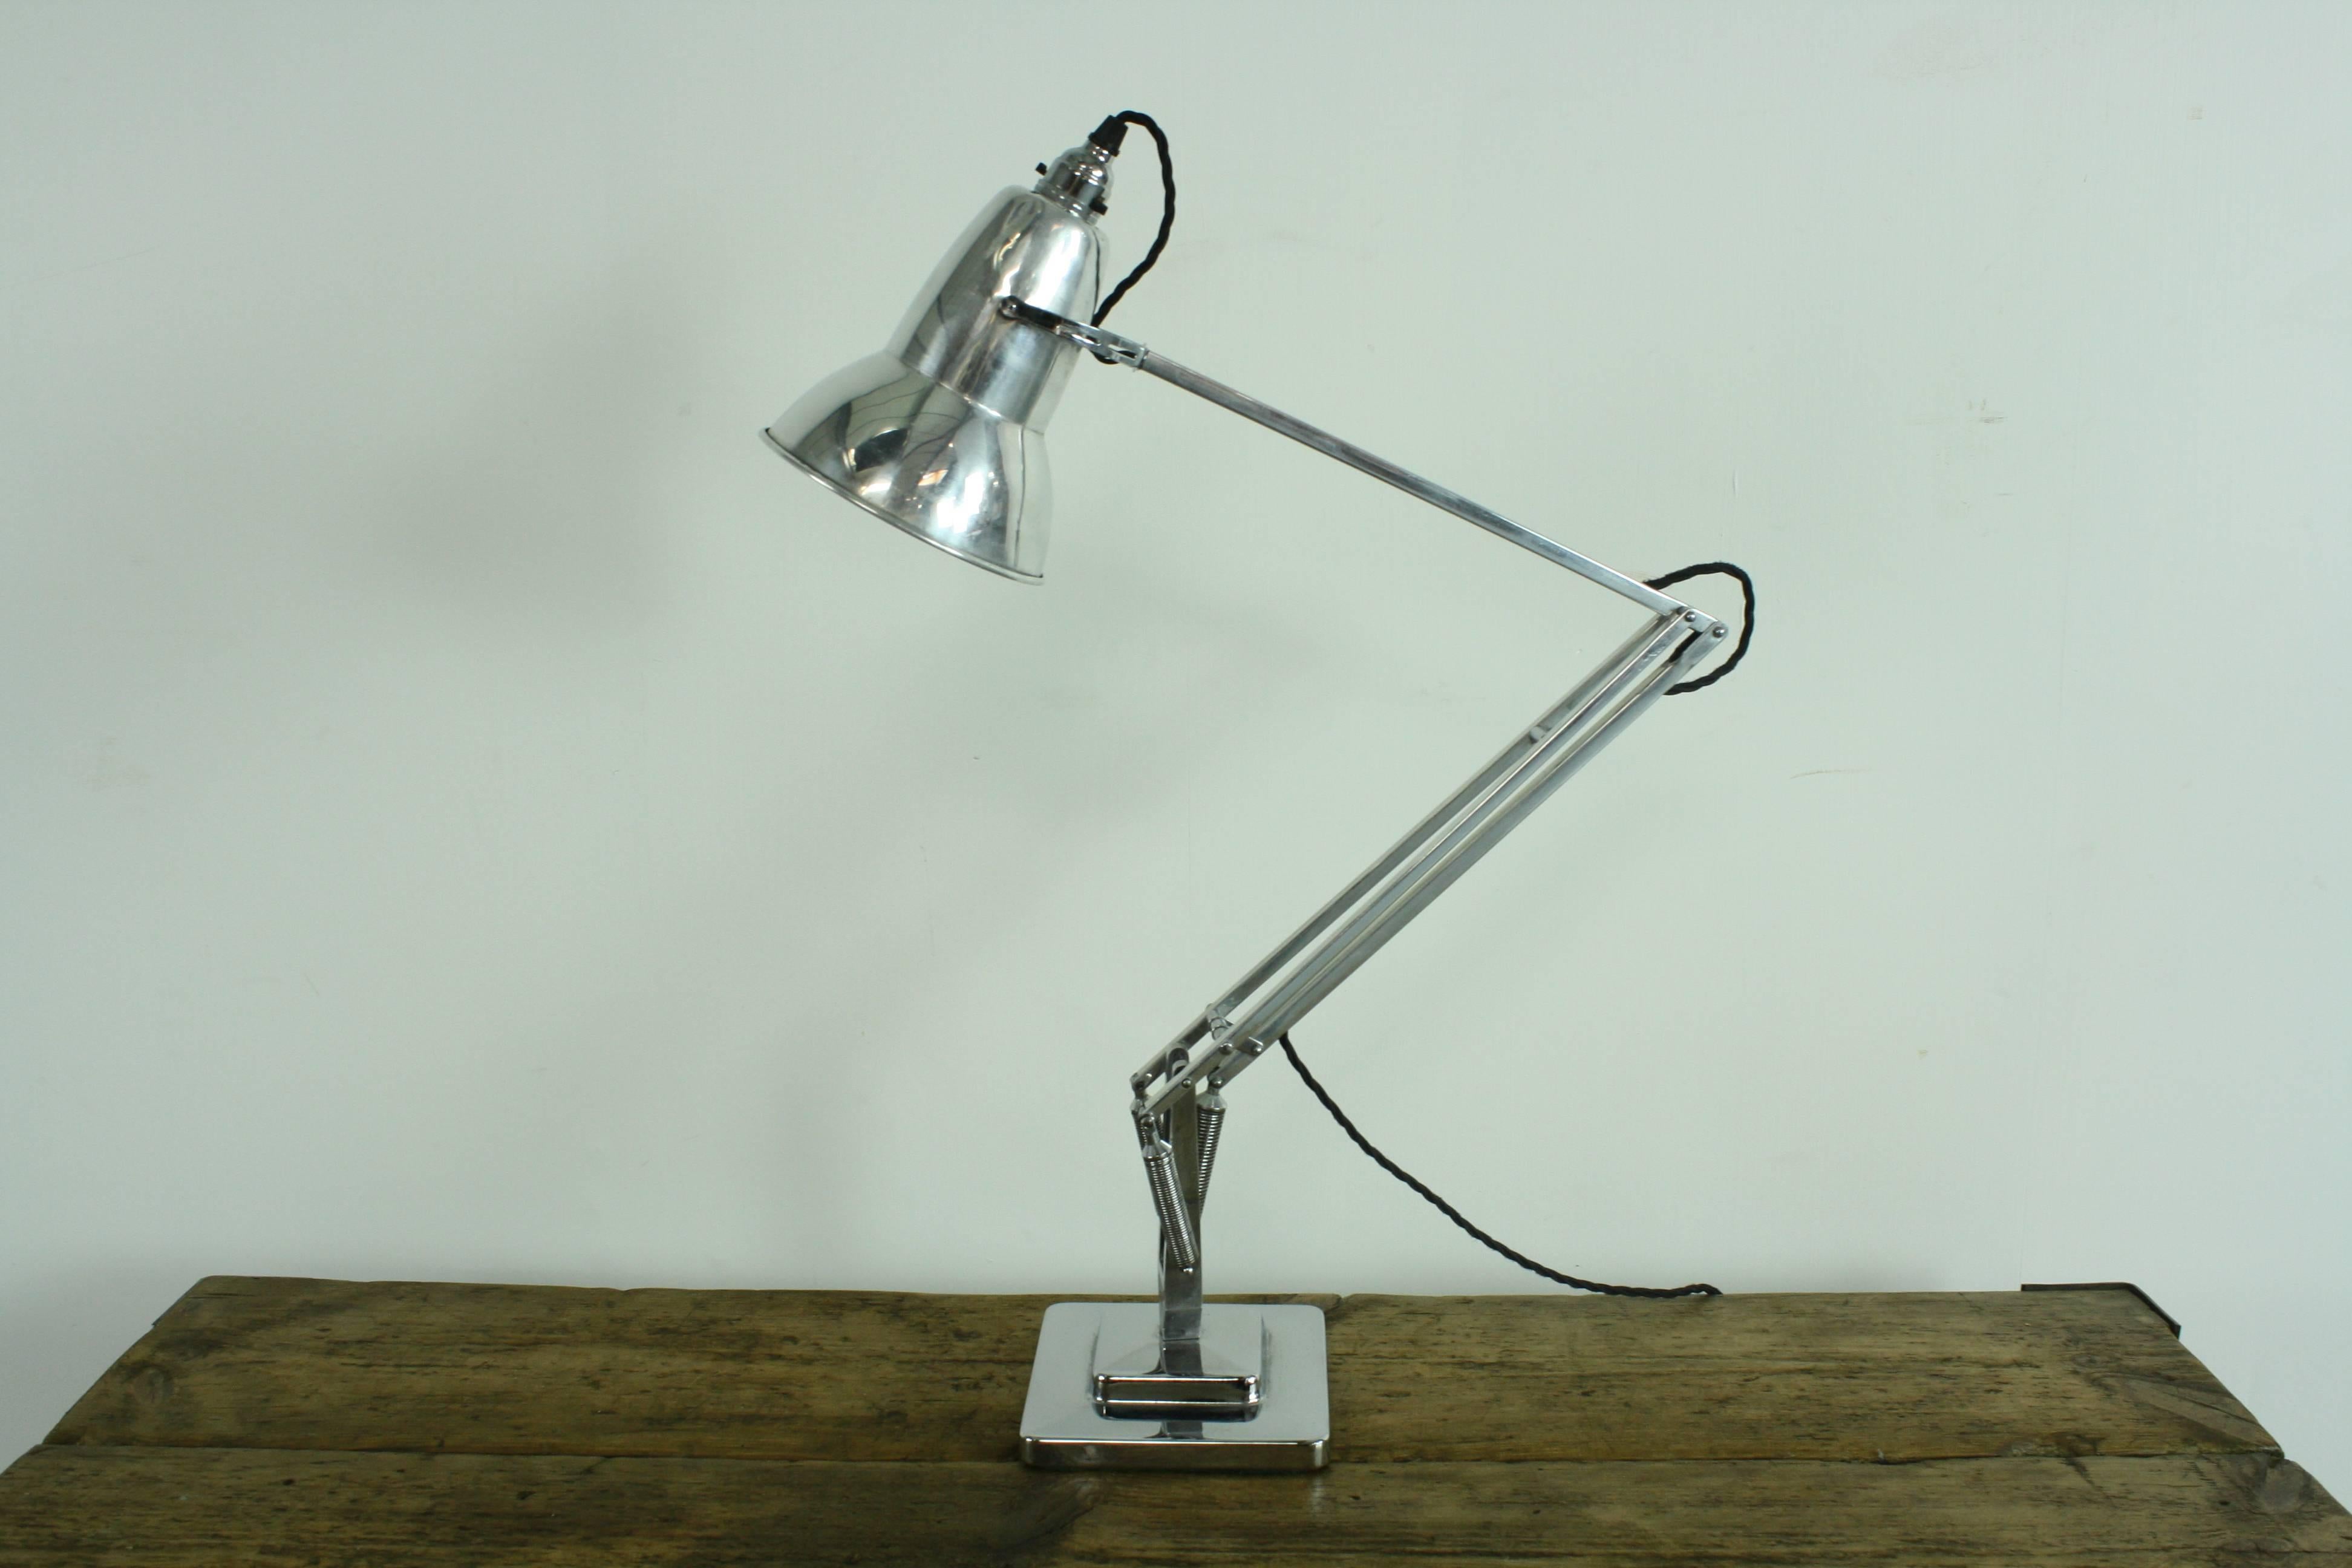 Designed by George Carwardine for Herbert Terry & Sons and made in Redditch, England, this is a lovely example of an original 1930s designed Herbert Terry Anglepoise.

With a roll-edge shade, two-stepped base and adjustable springs. 

It has